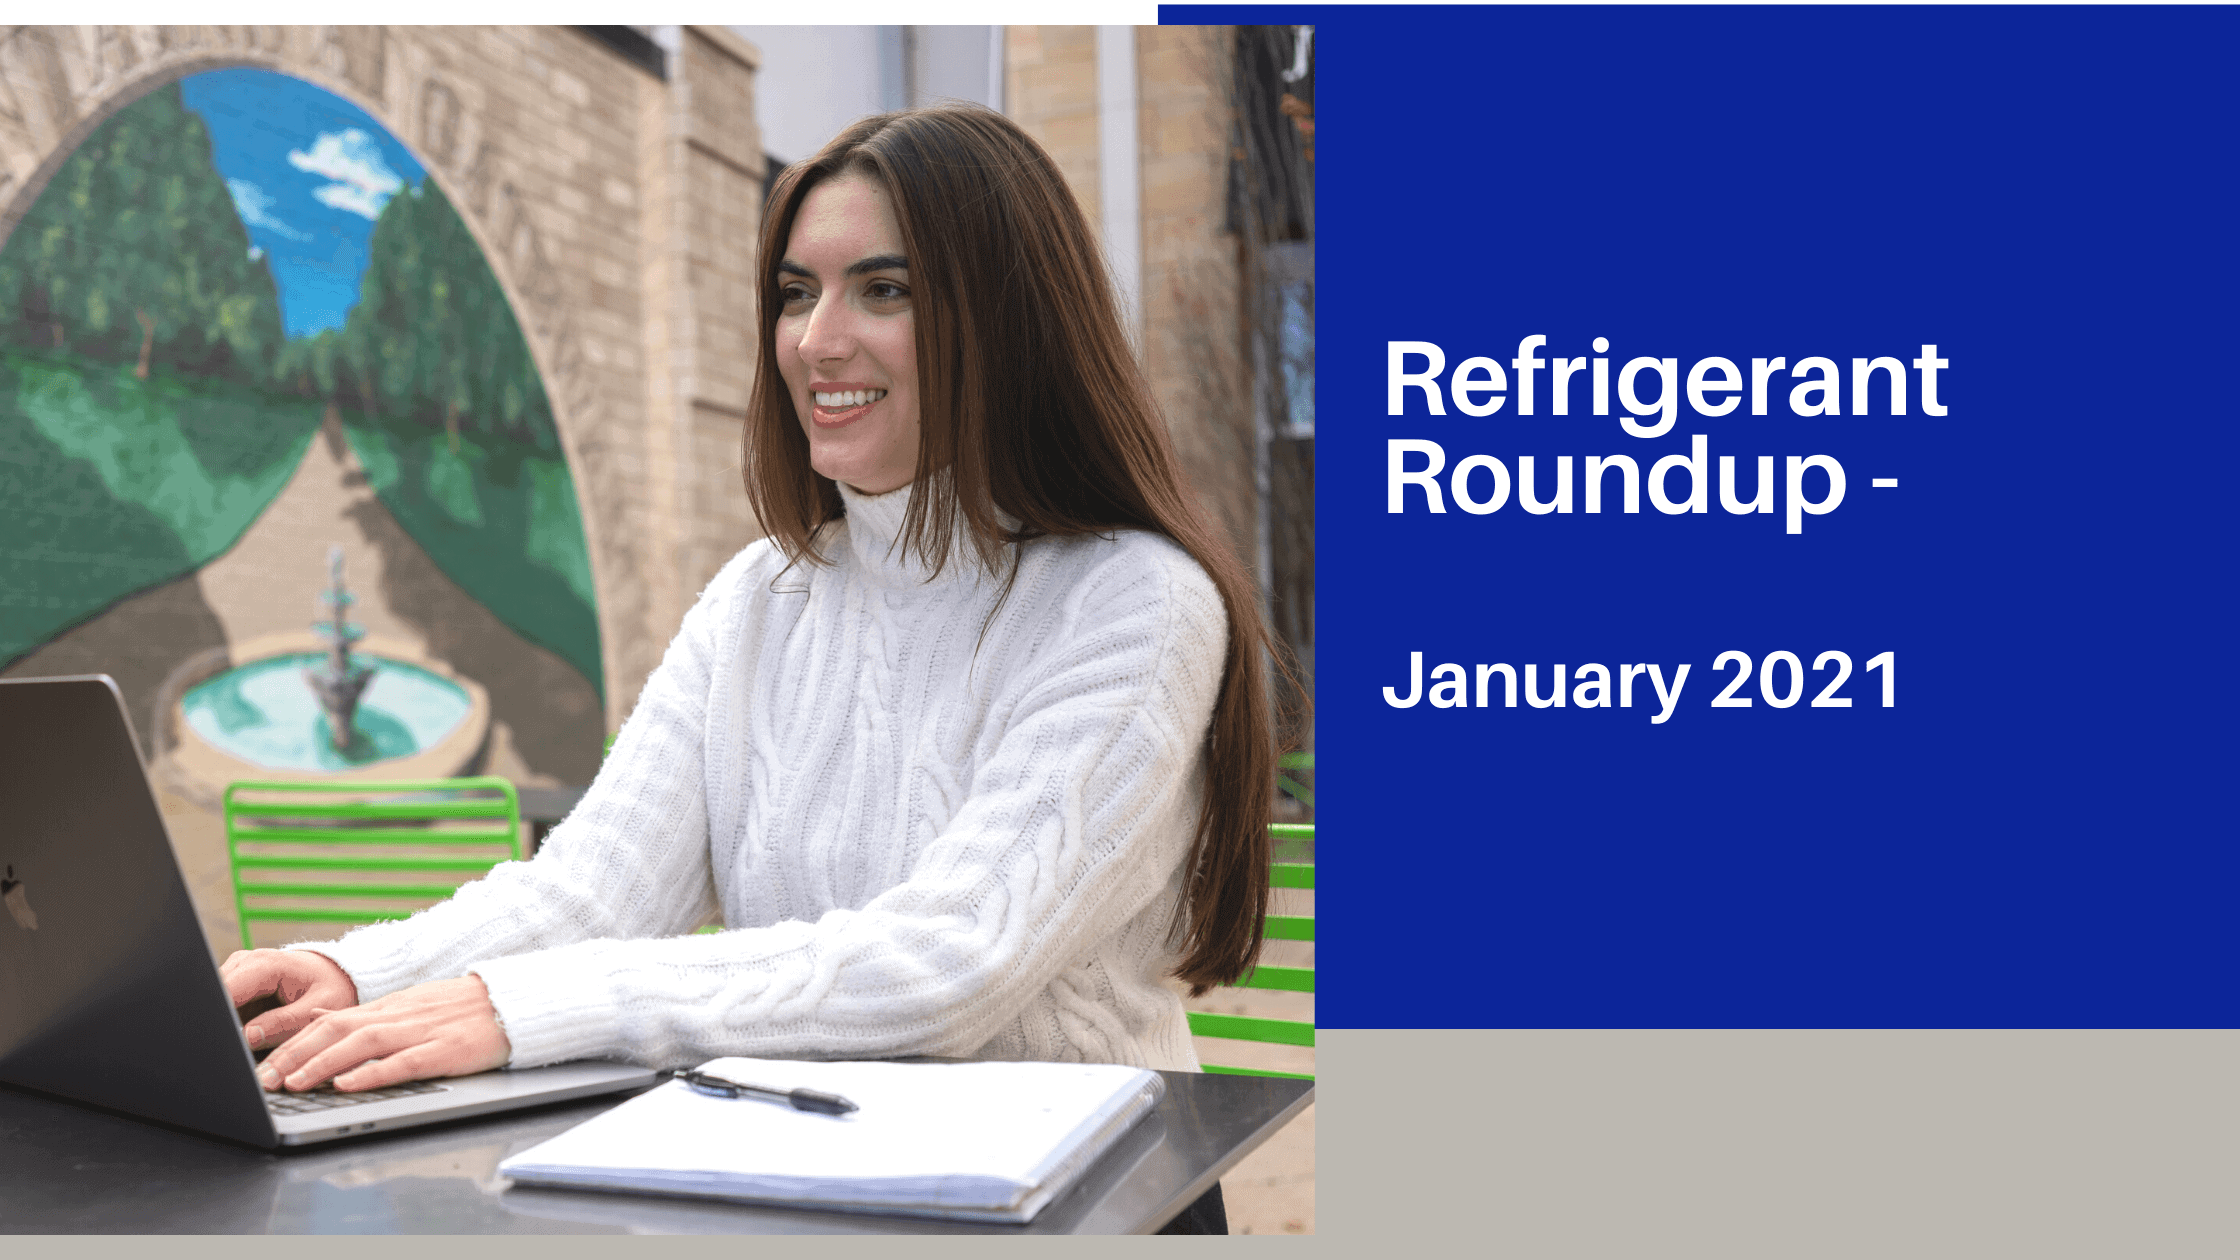 You are currently viewing Refrigerant Roundup for January 2021